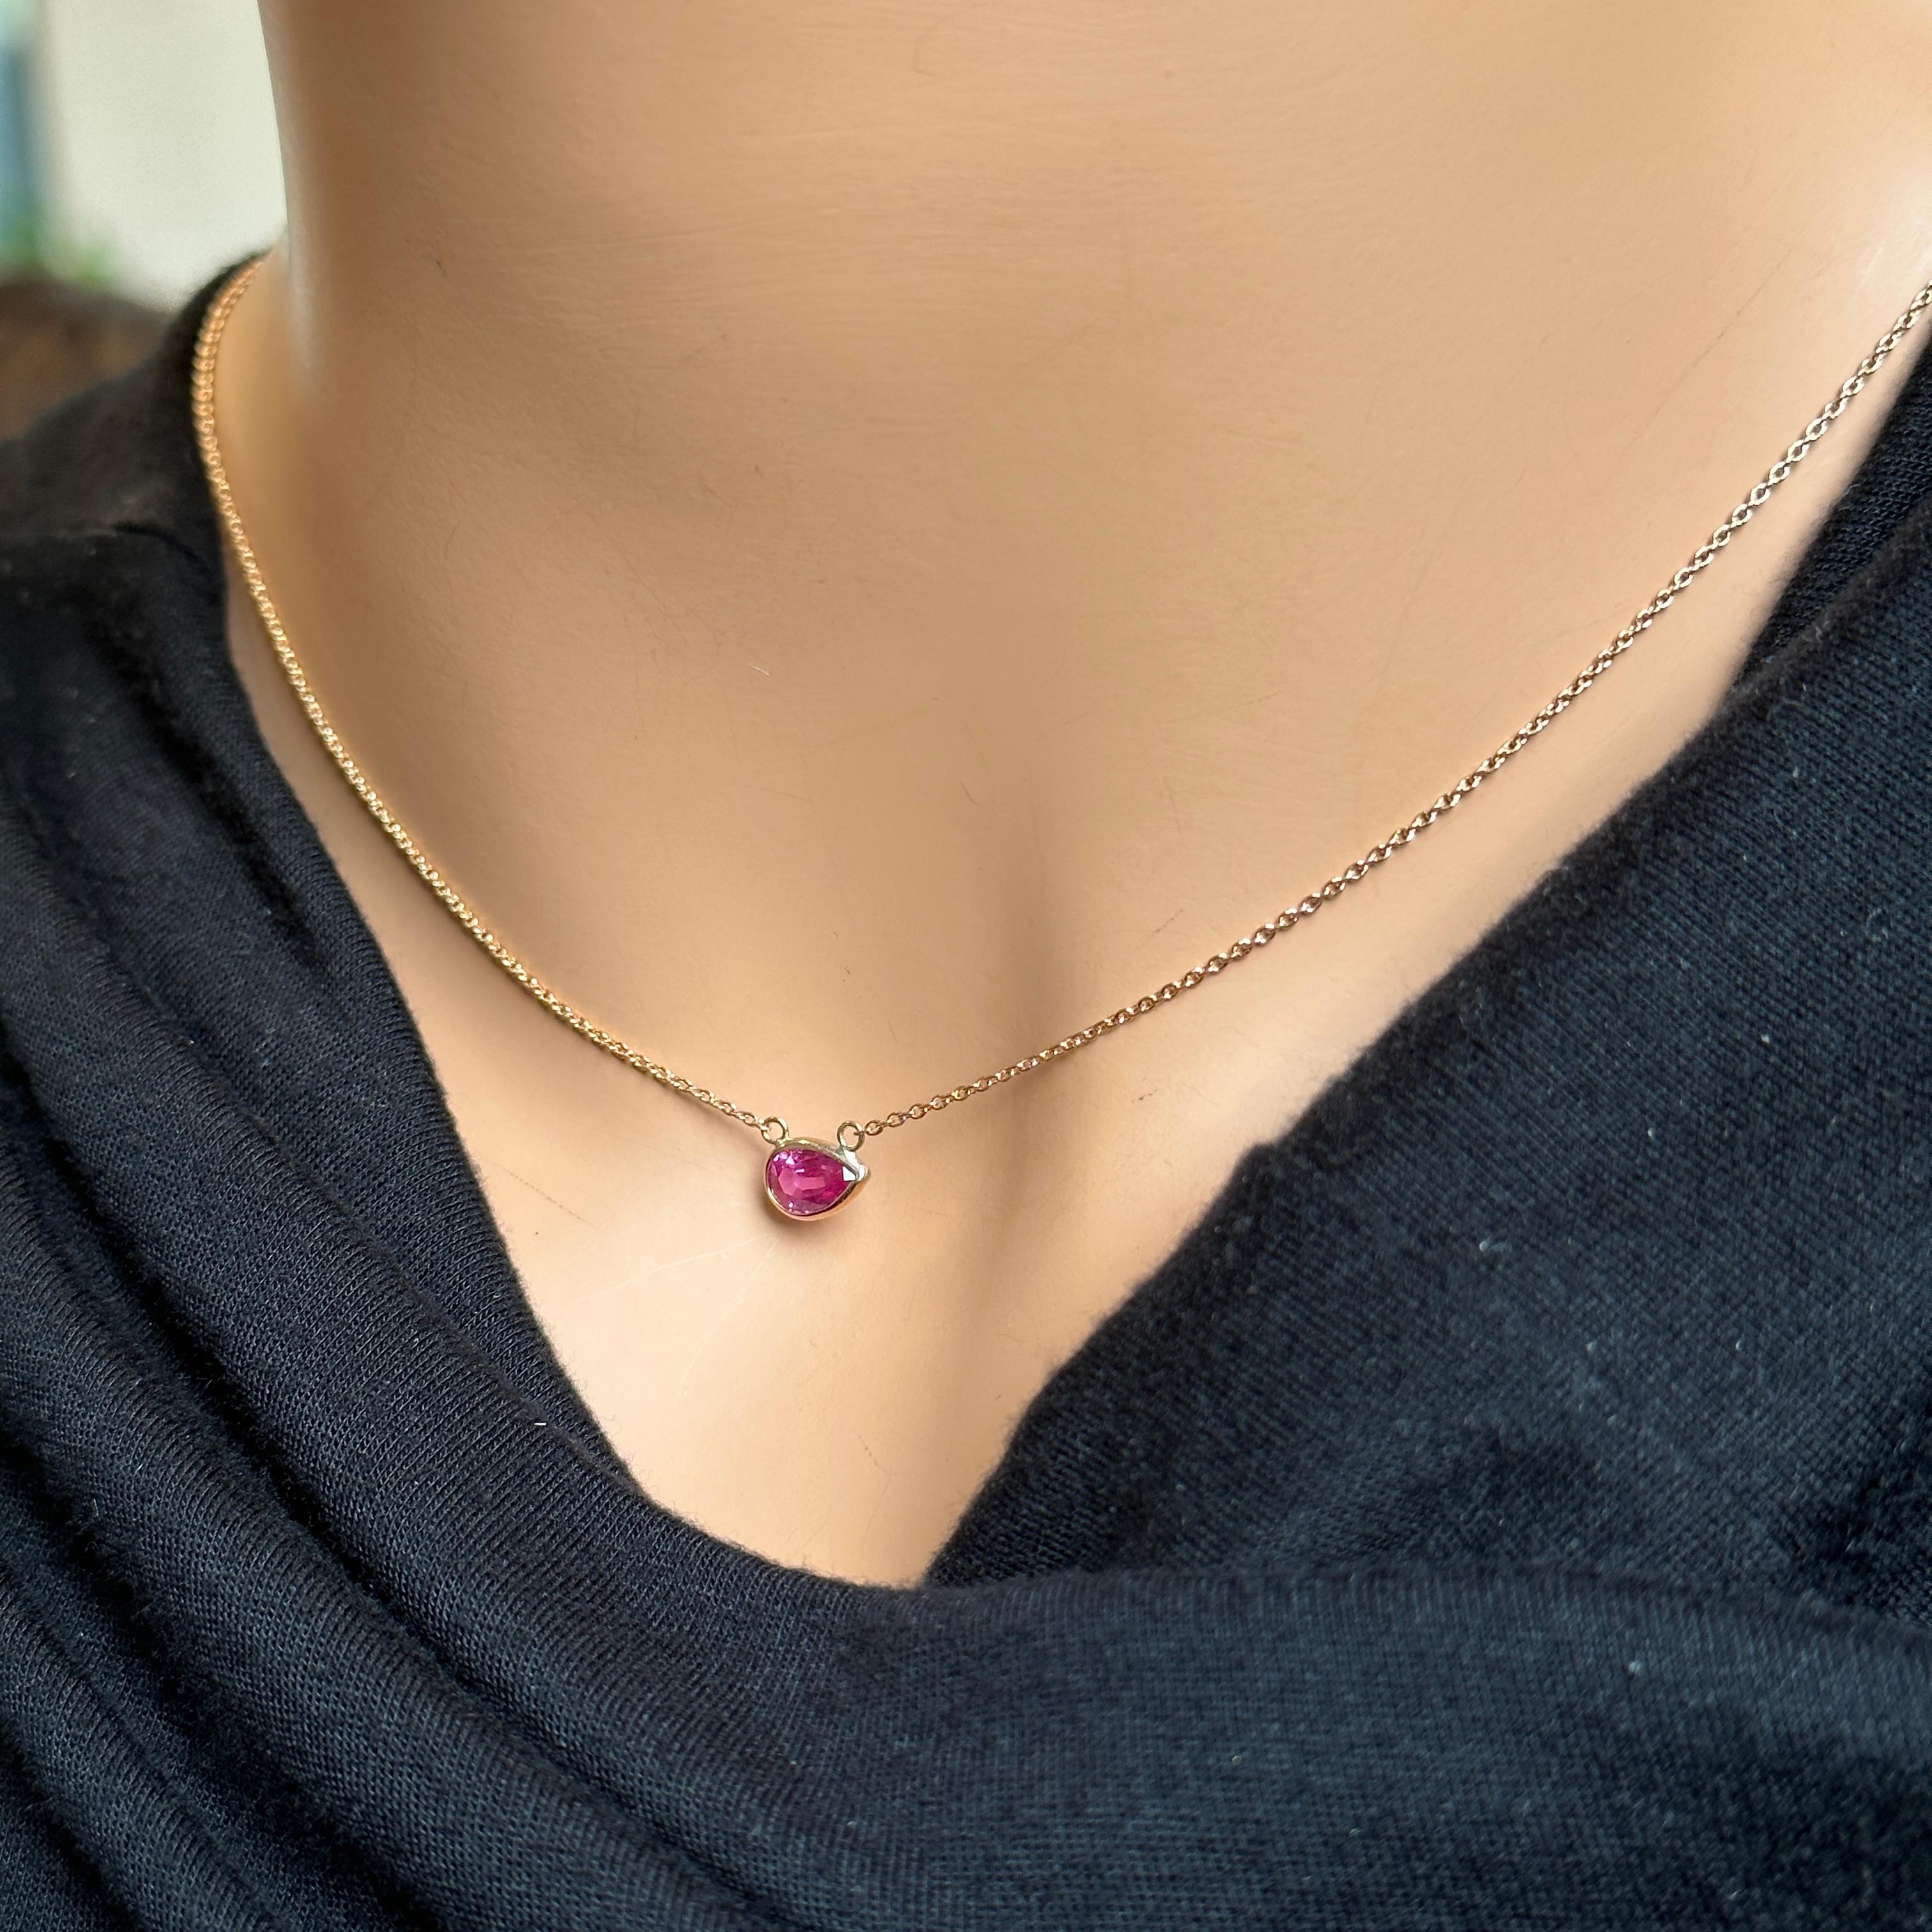 1.17 Carat Pink Sapphire Pear & Fashion Necklaces Berberyn Certified In 14K RG In New Condition For Sale In Chicago, IL